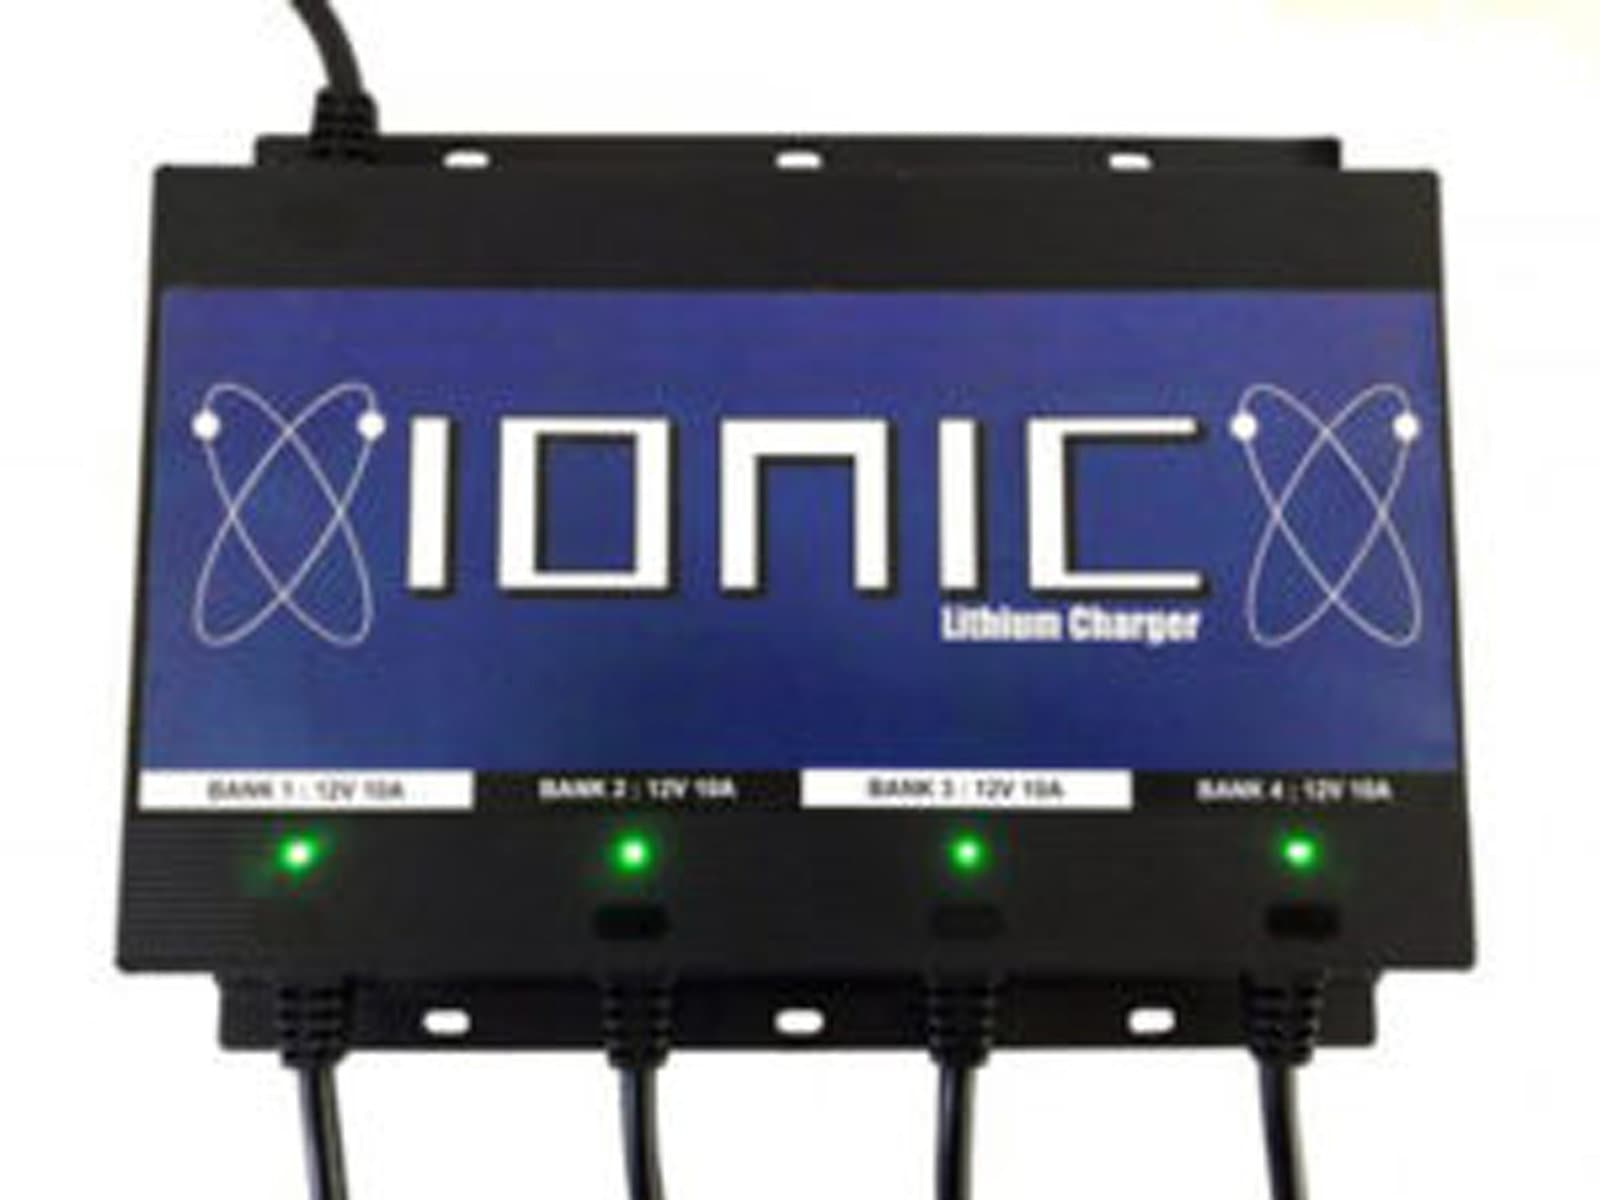 Image of an Ionic 4 bank battery charger.